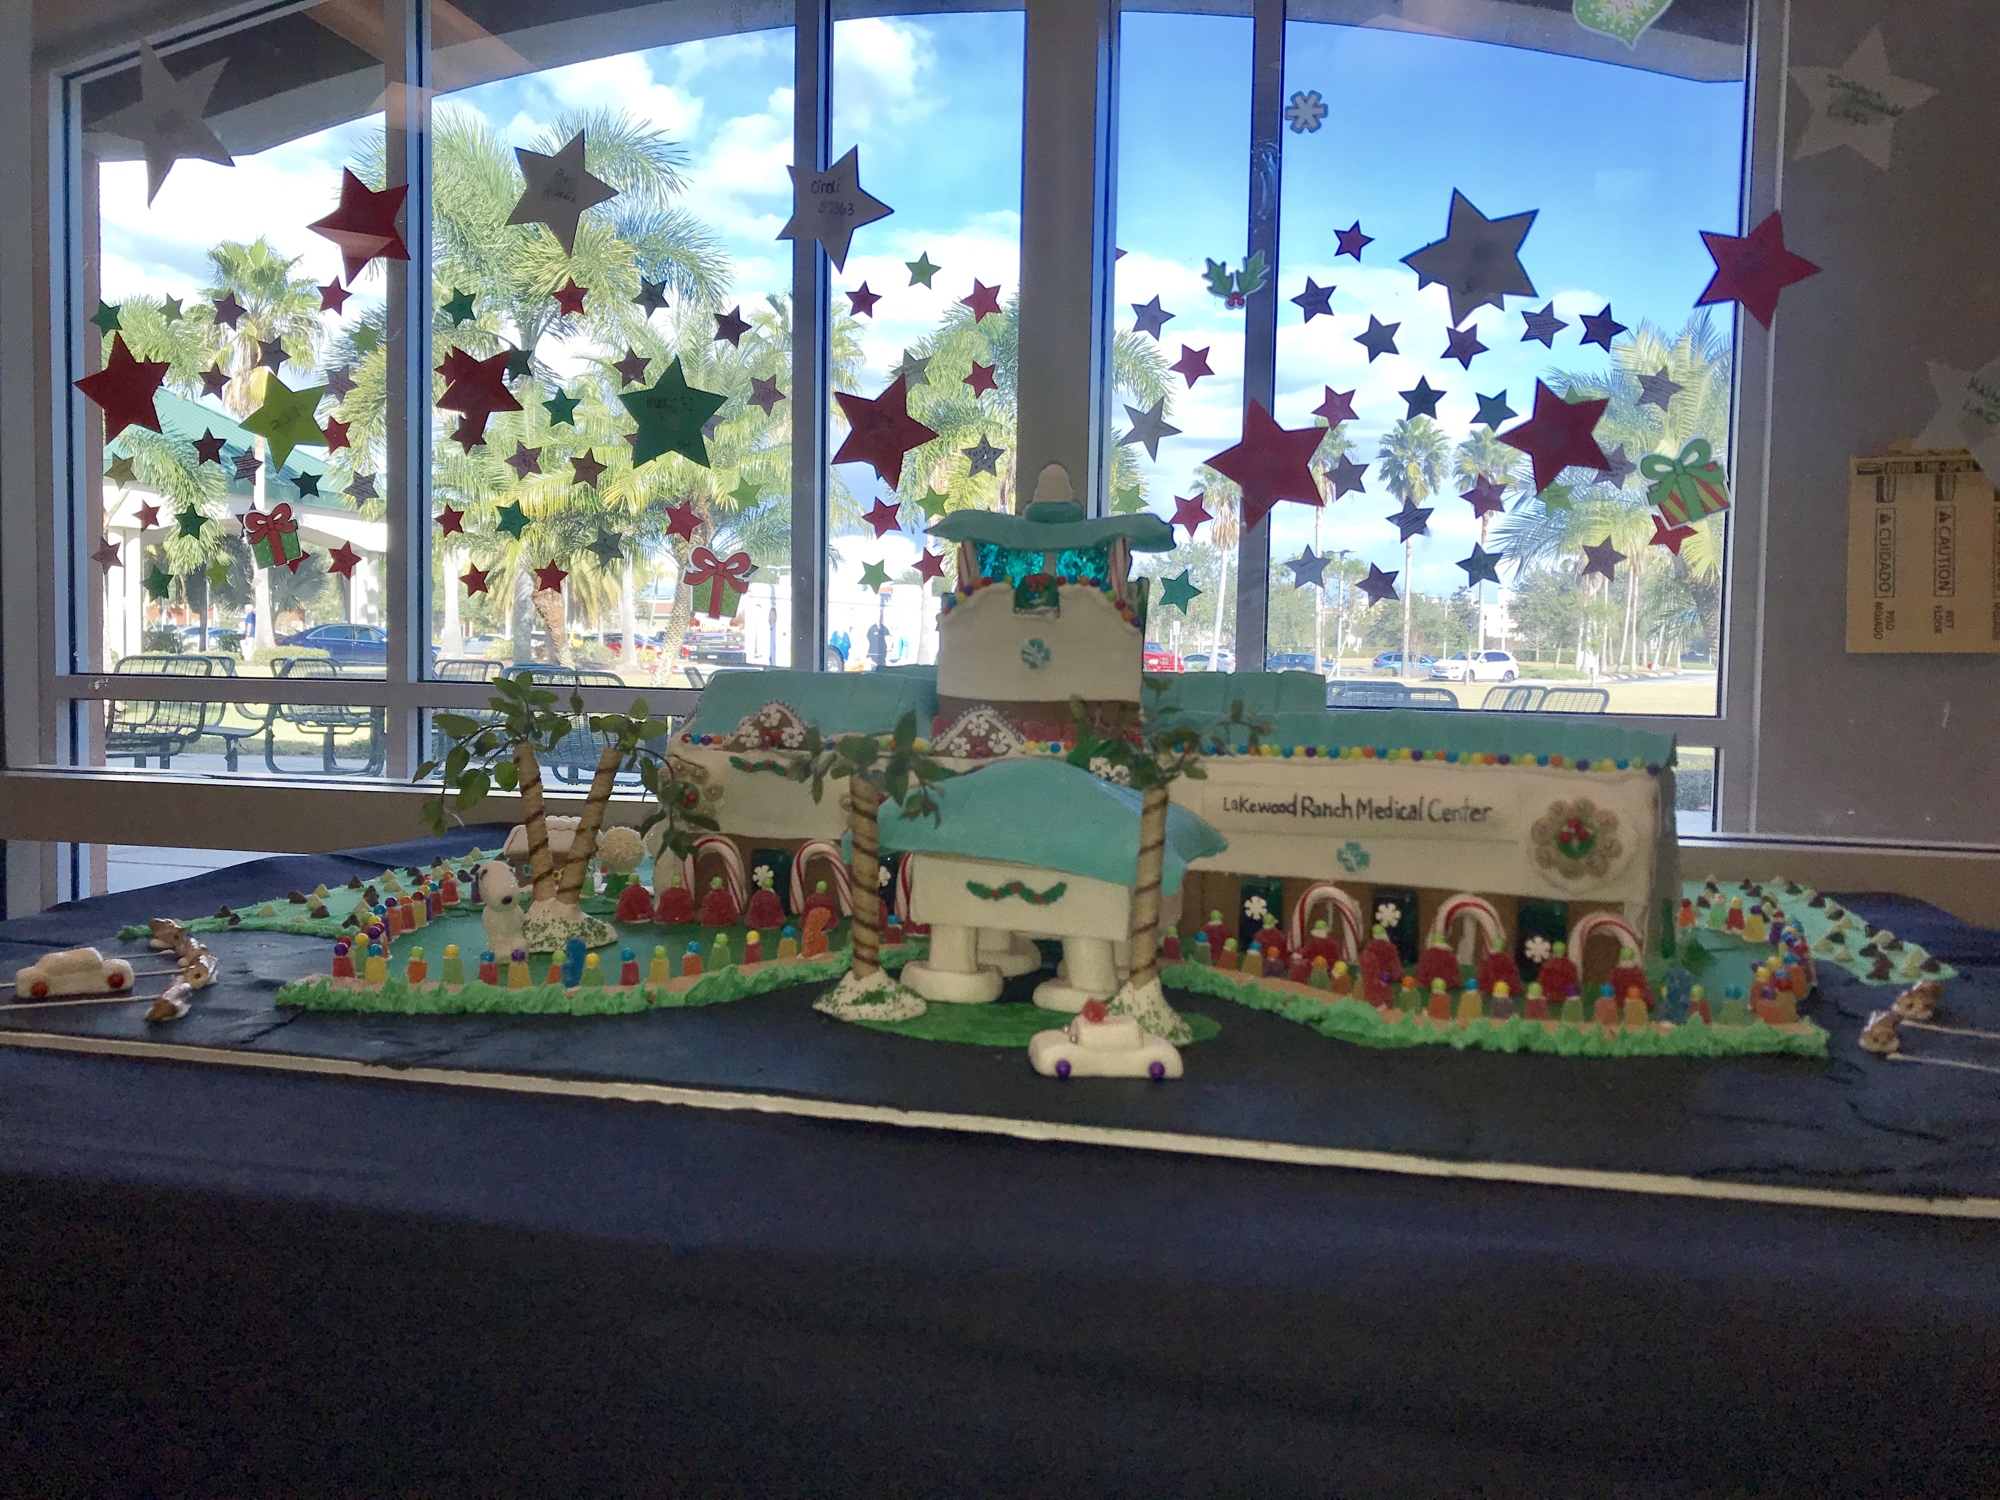 This gingerbread house replica of Lakewood Ranch Medical Center won and in-house contest. Courtesy photo.